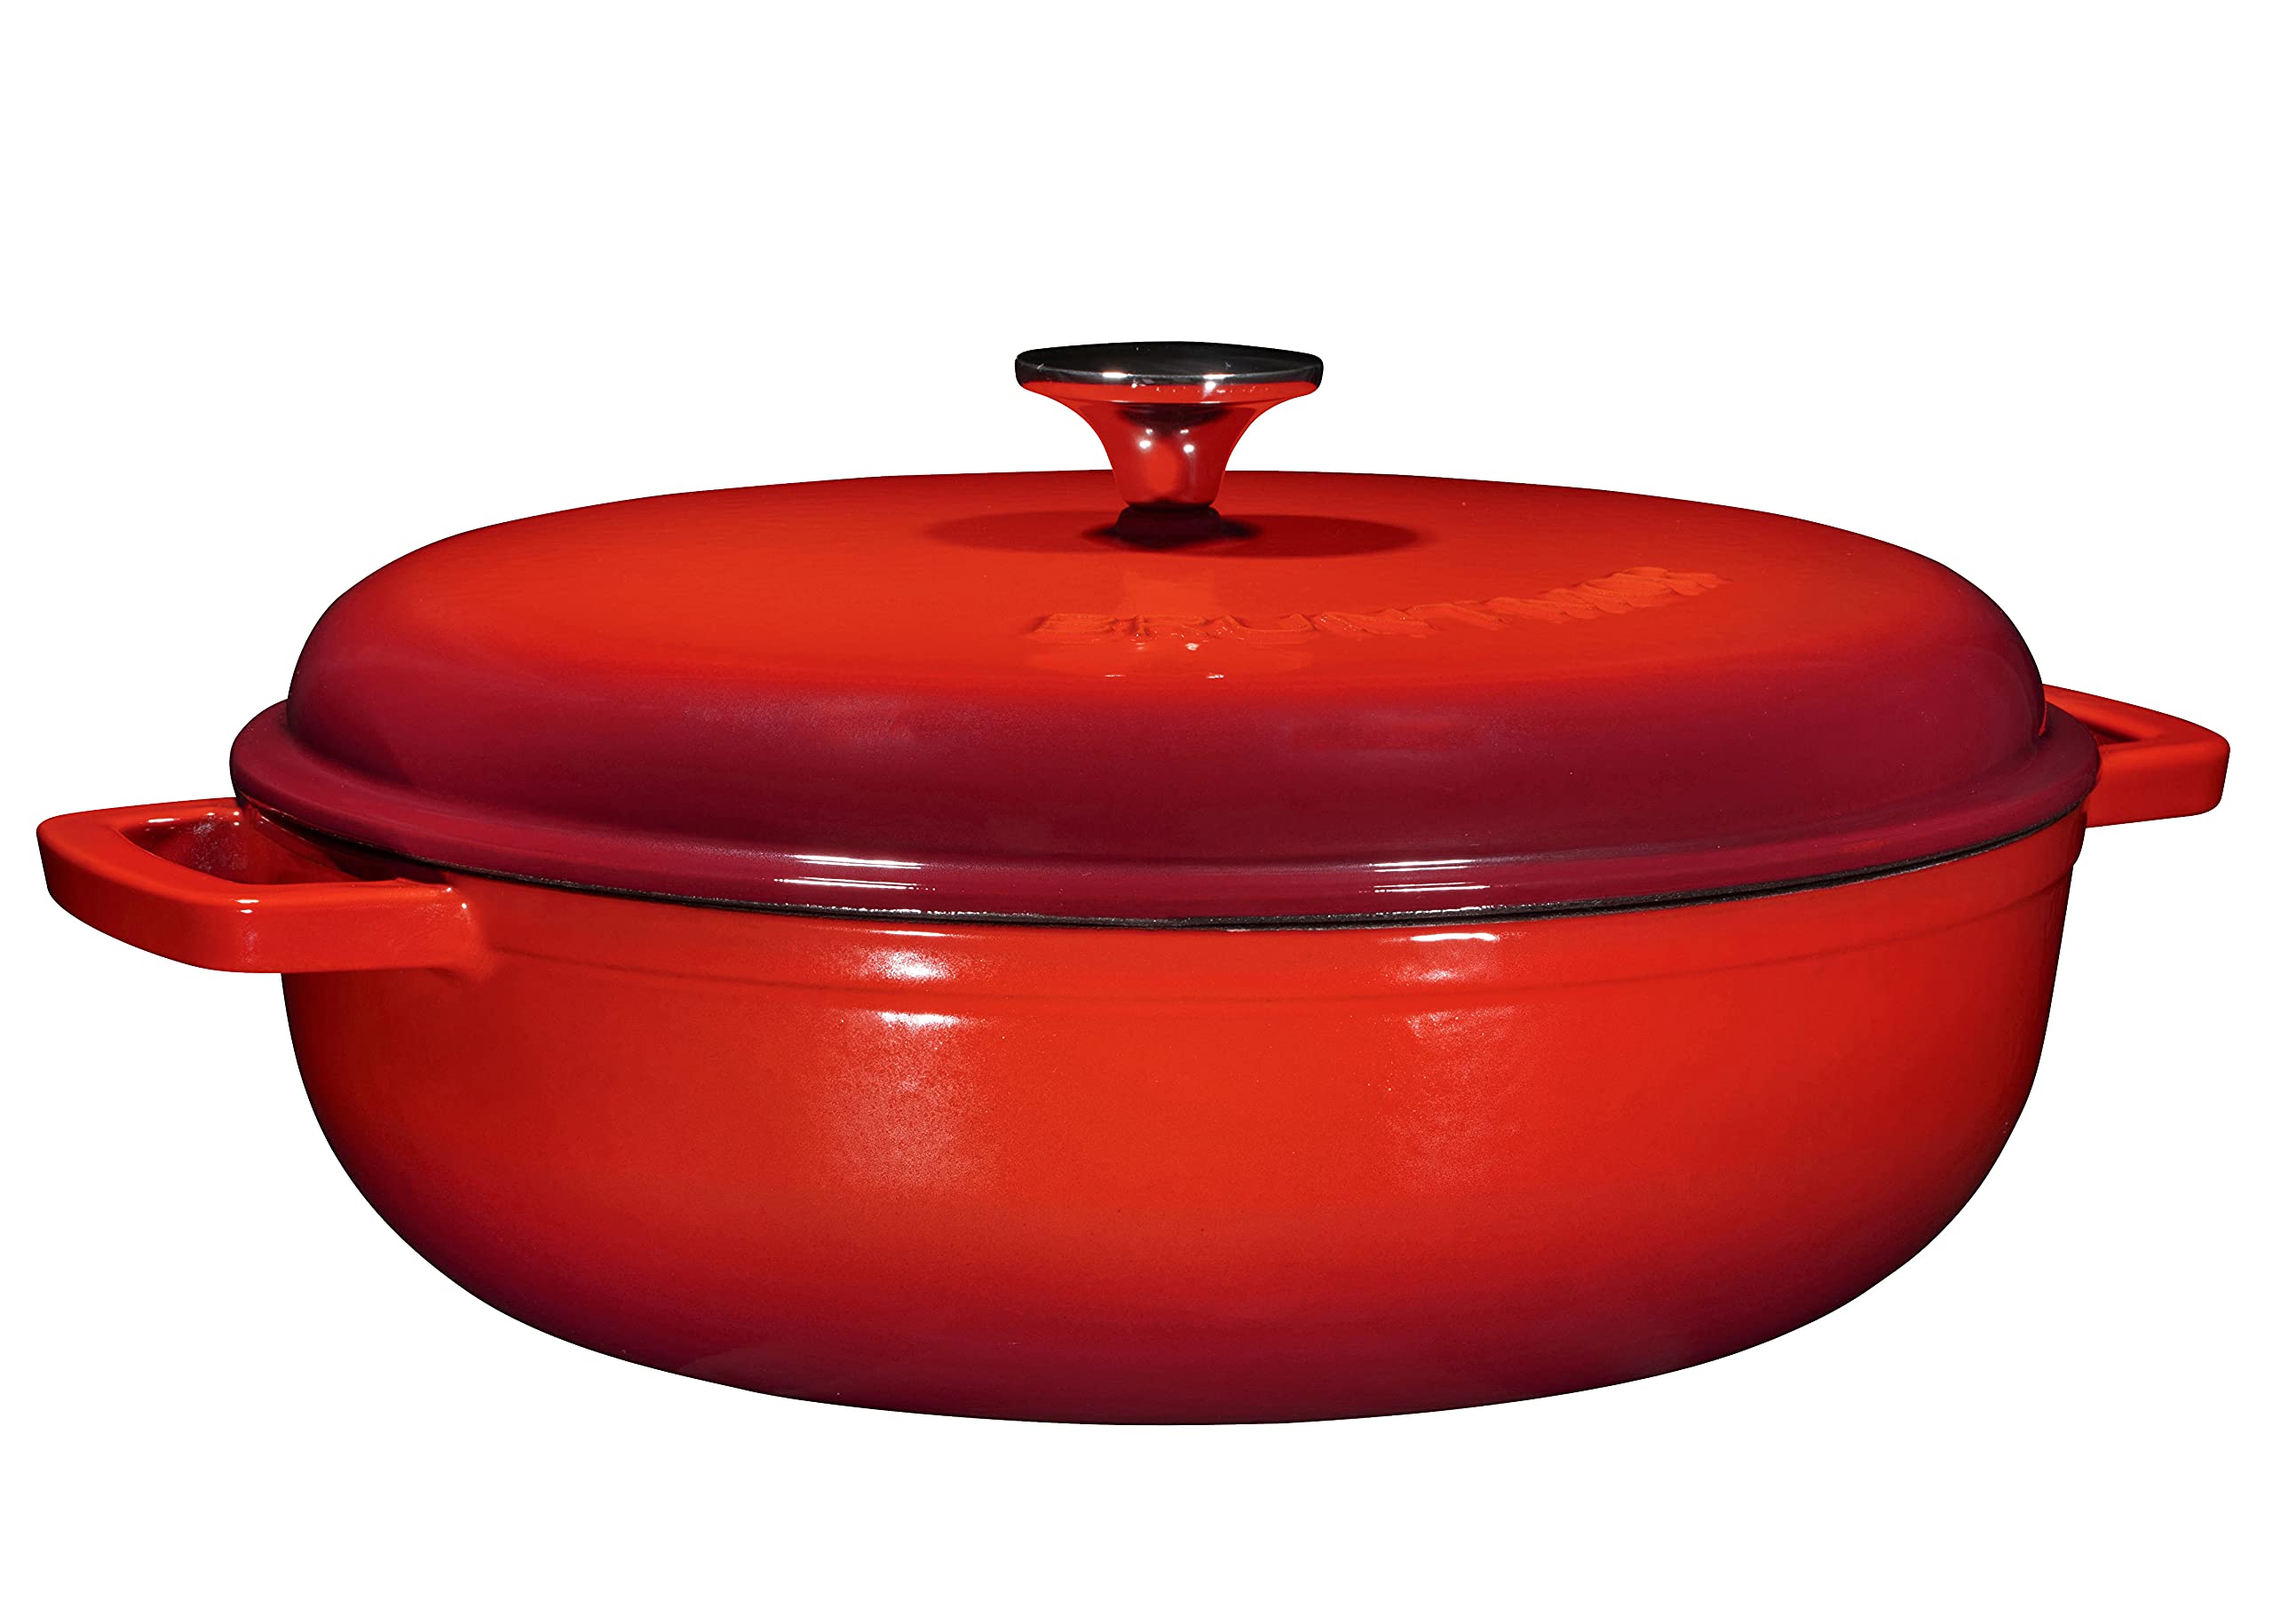 Bruntmor Enameled Cast Iron Dutch Oven With Lid And Stainless